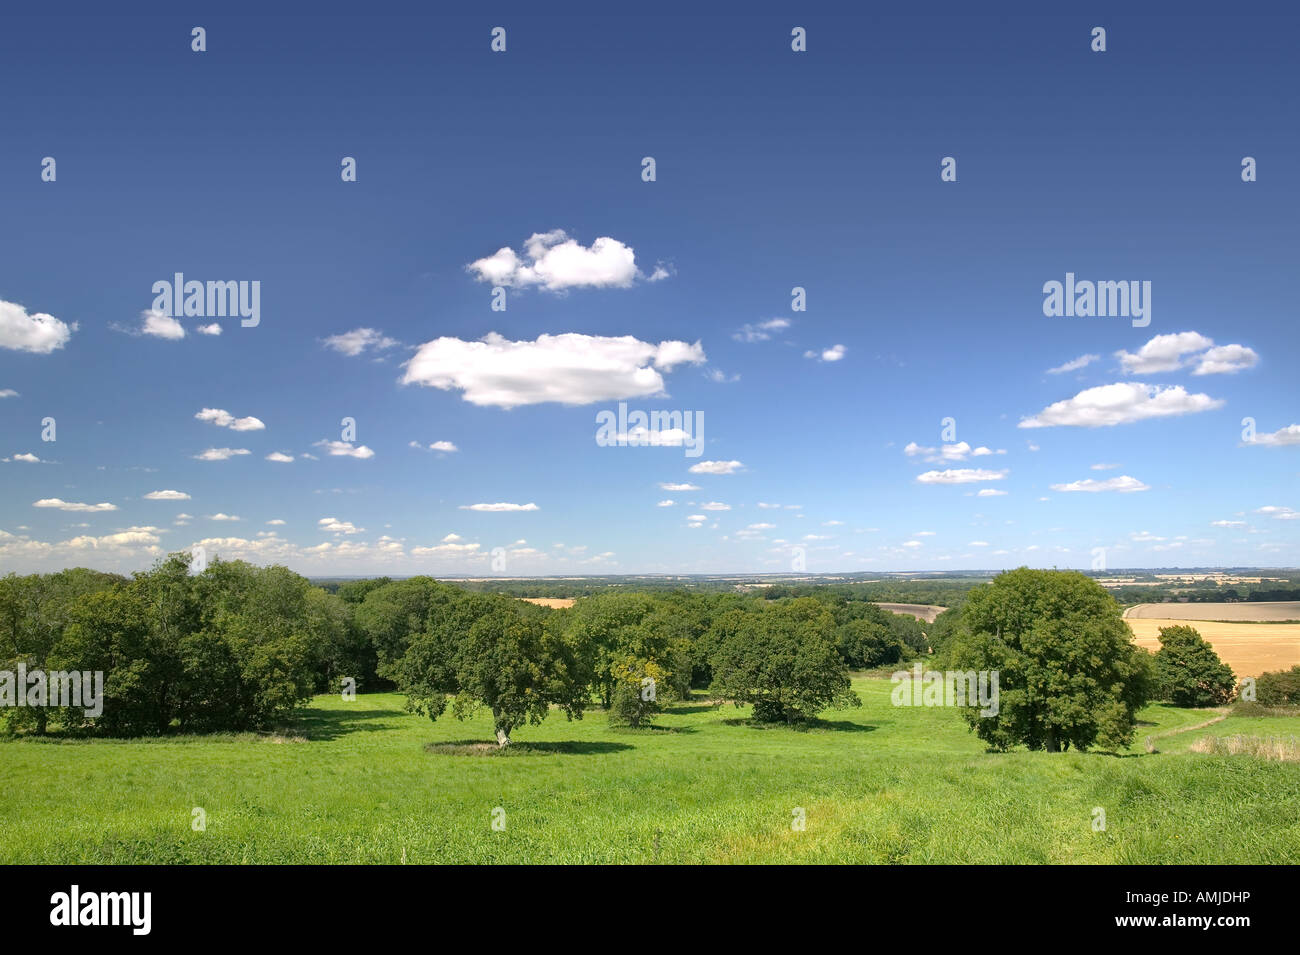 Oak trees in the foreground and fields in the distance under a blue cloudy sky Stock Photo